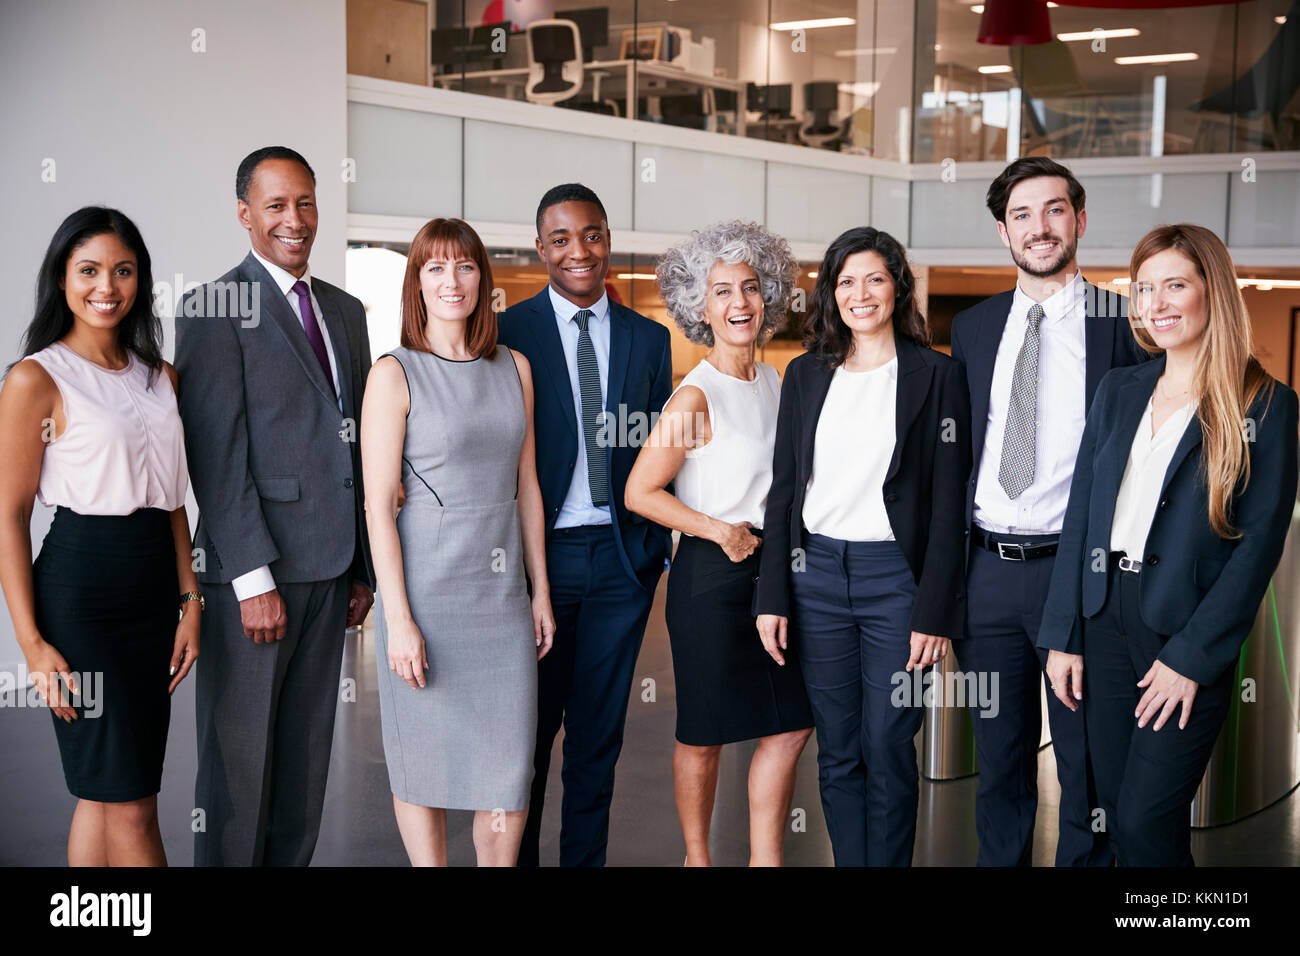 Business people celebrating in the office Stock Photo